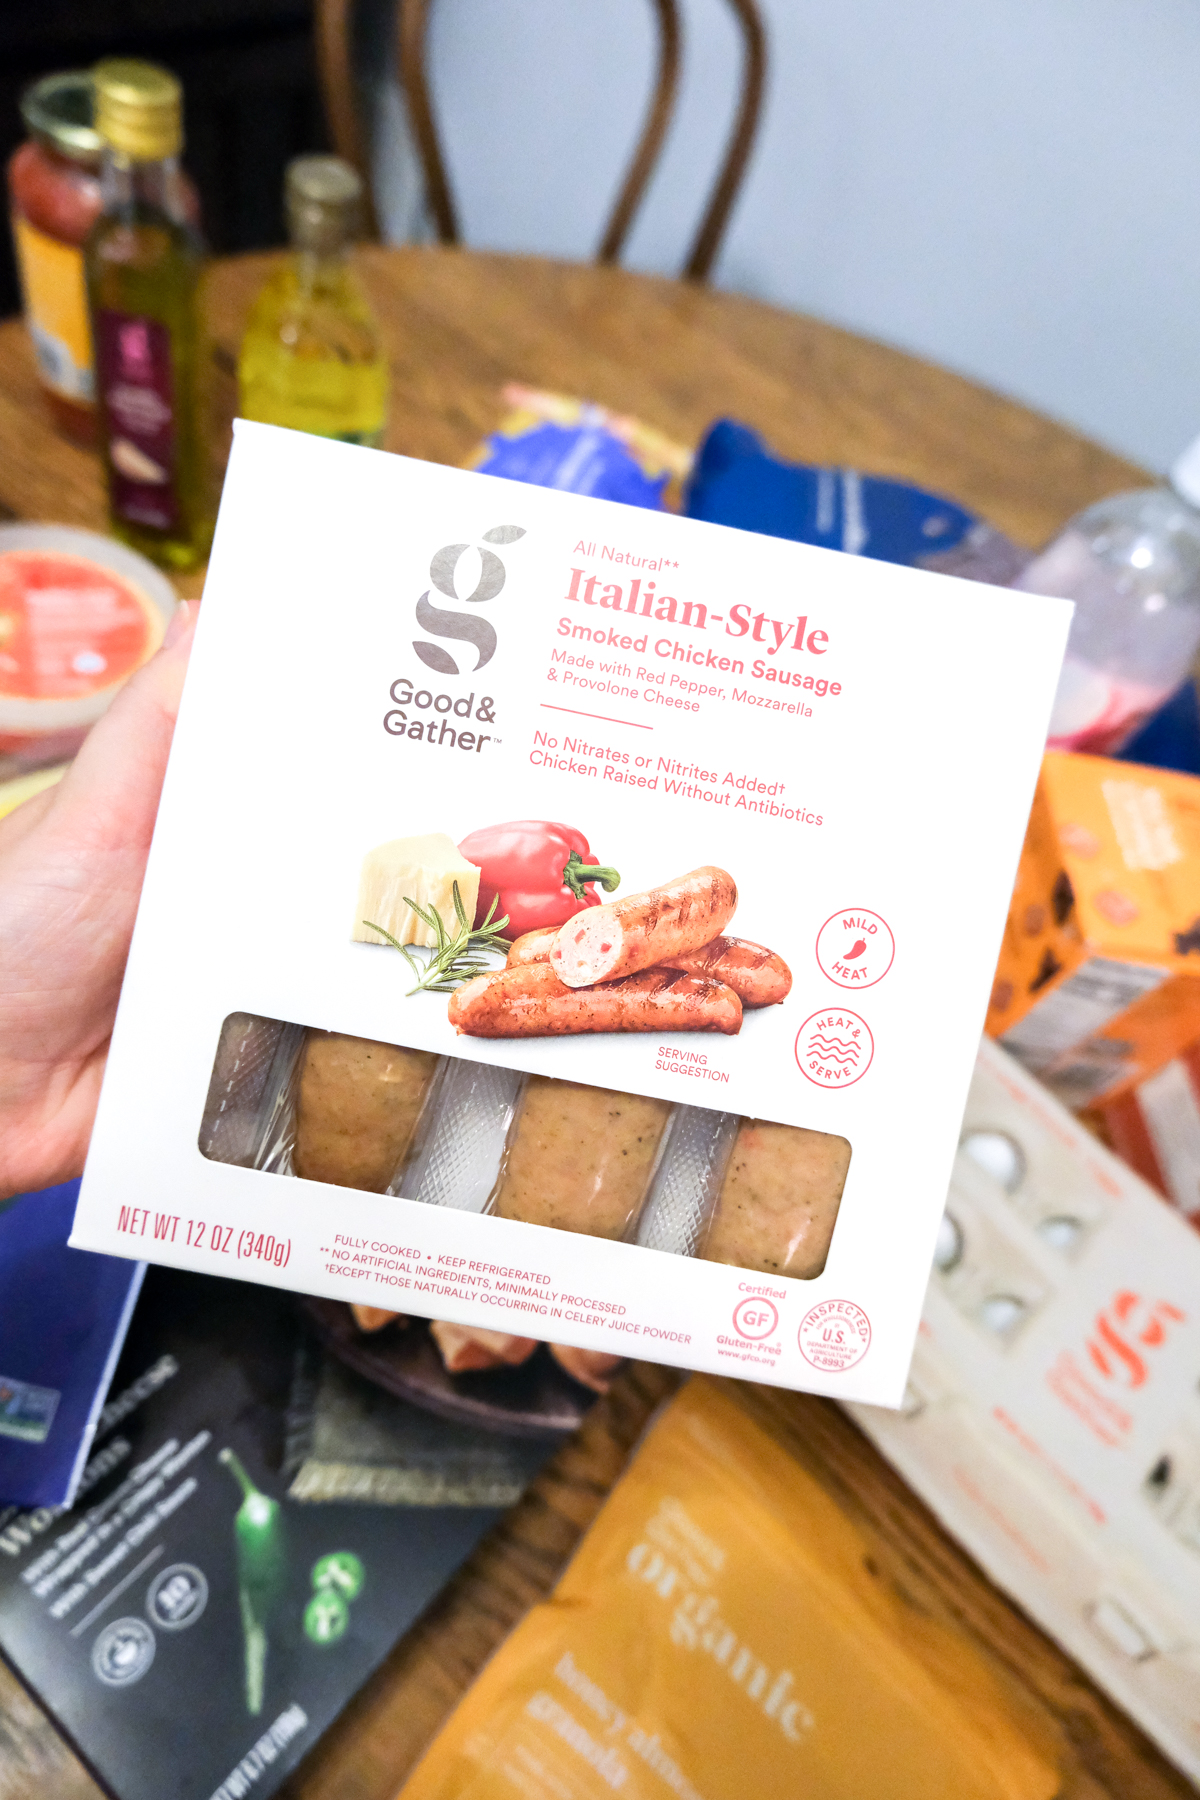 Italian-style chicken sausage Good & Gather at Target